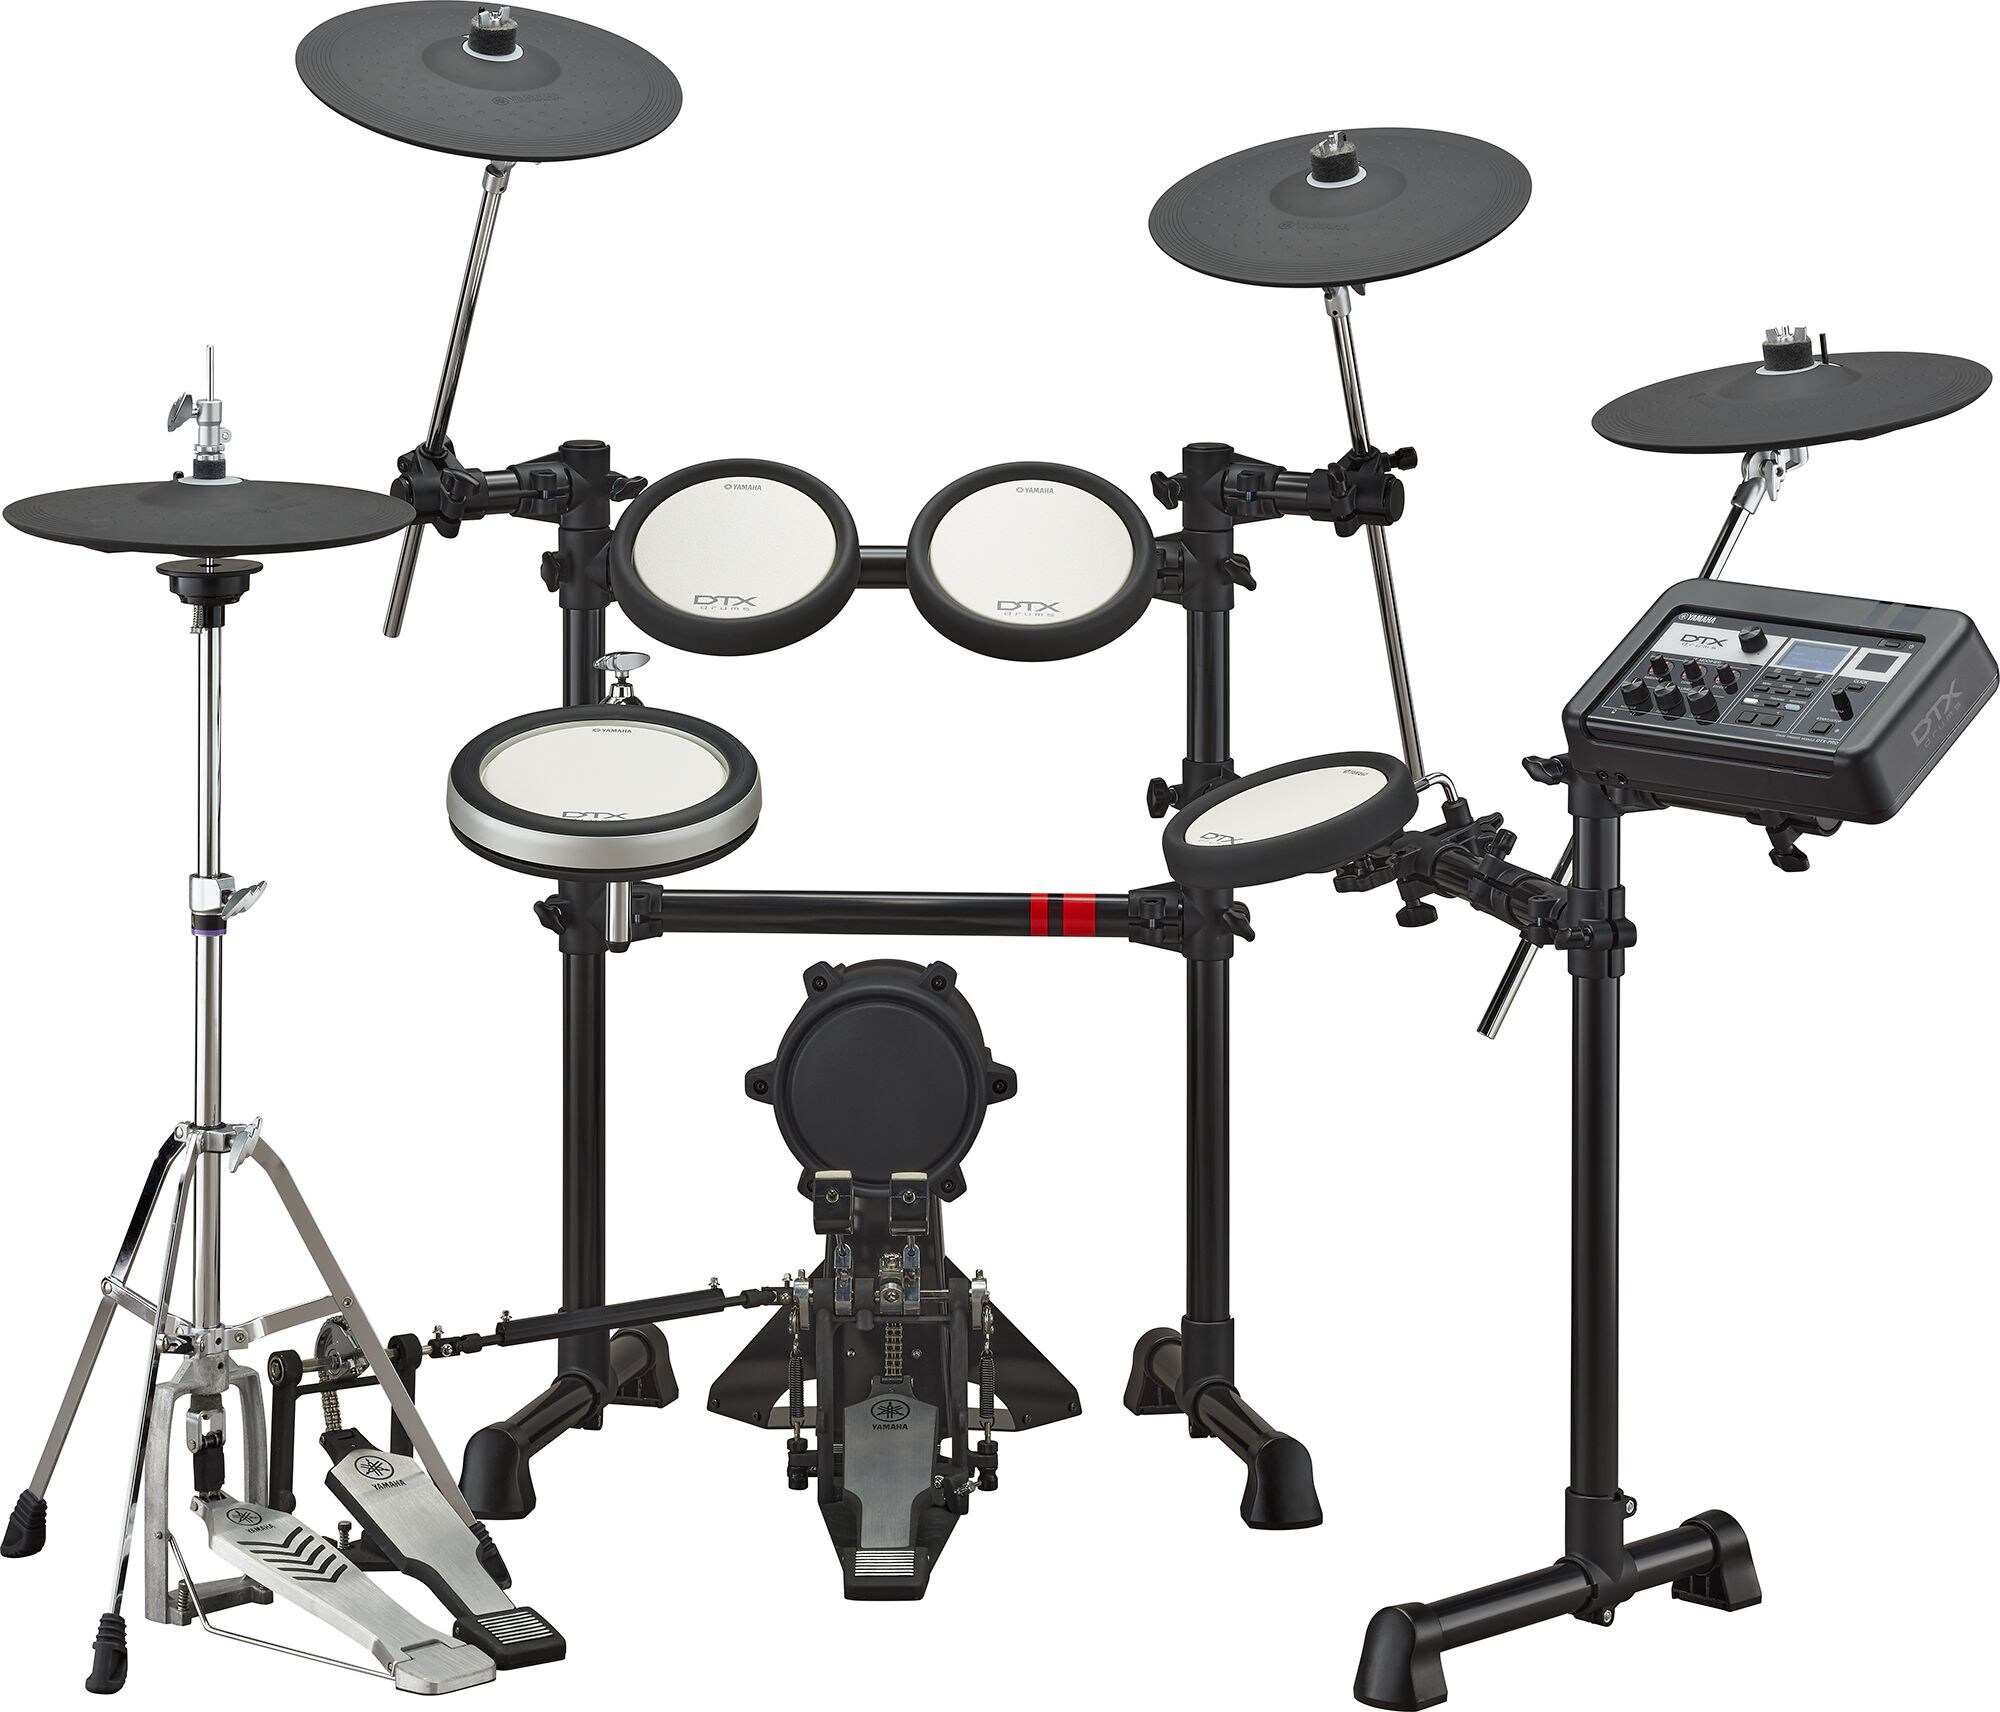 DTX6 Series - Asia - - Africa - - / / Middle Products - Drums Latin - - Electronic Drum / Kits Yamaha / / Drums CIS Instruments Electronic Oceania Musical America East Products